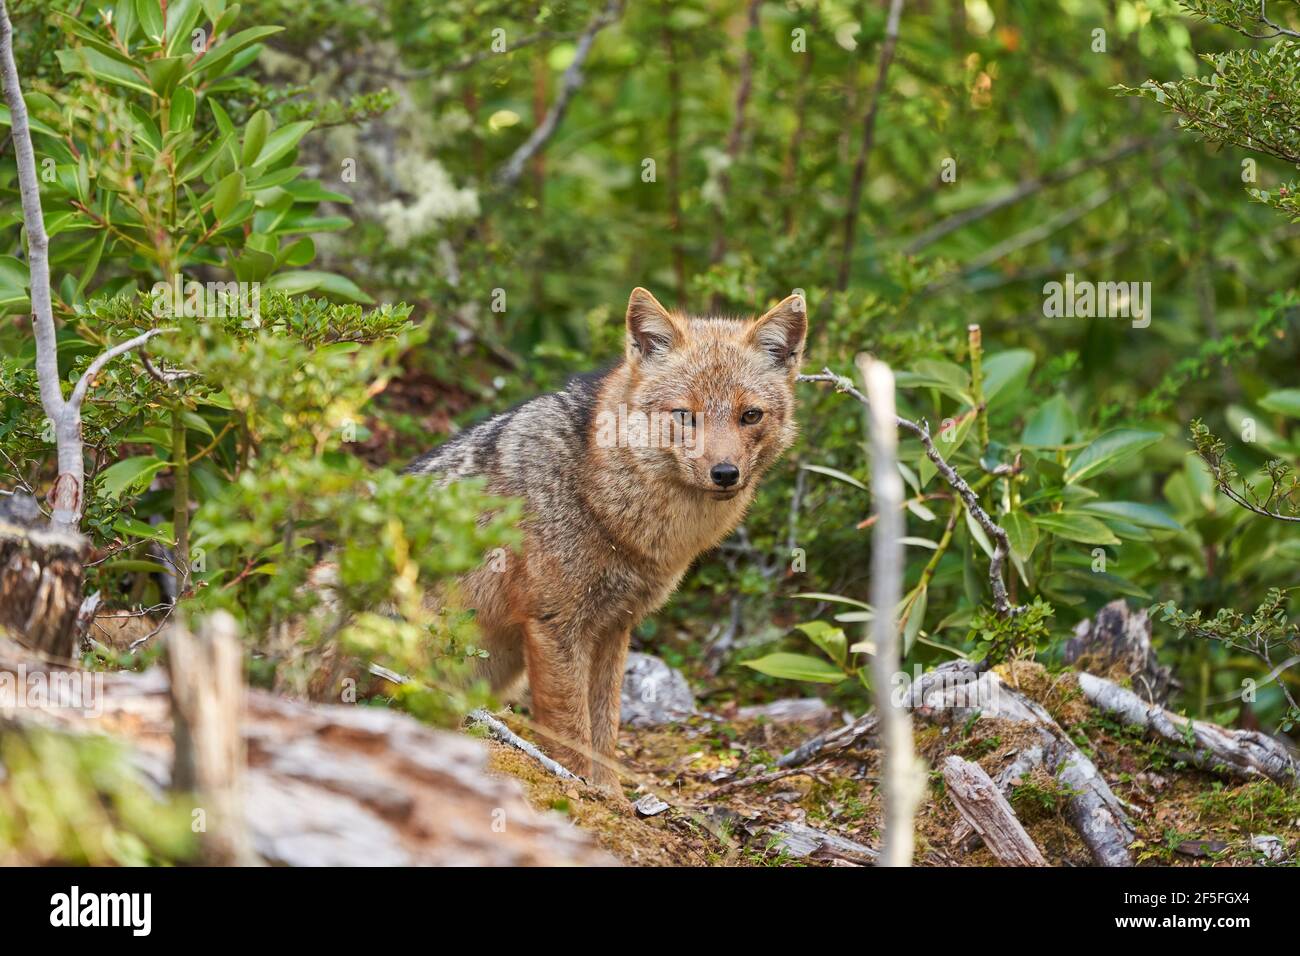 Lycalopex griseus, patagonian fox can be found on tierra del fuego, Patagonia, south america 16 Stock Photo